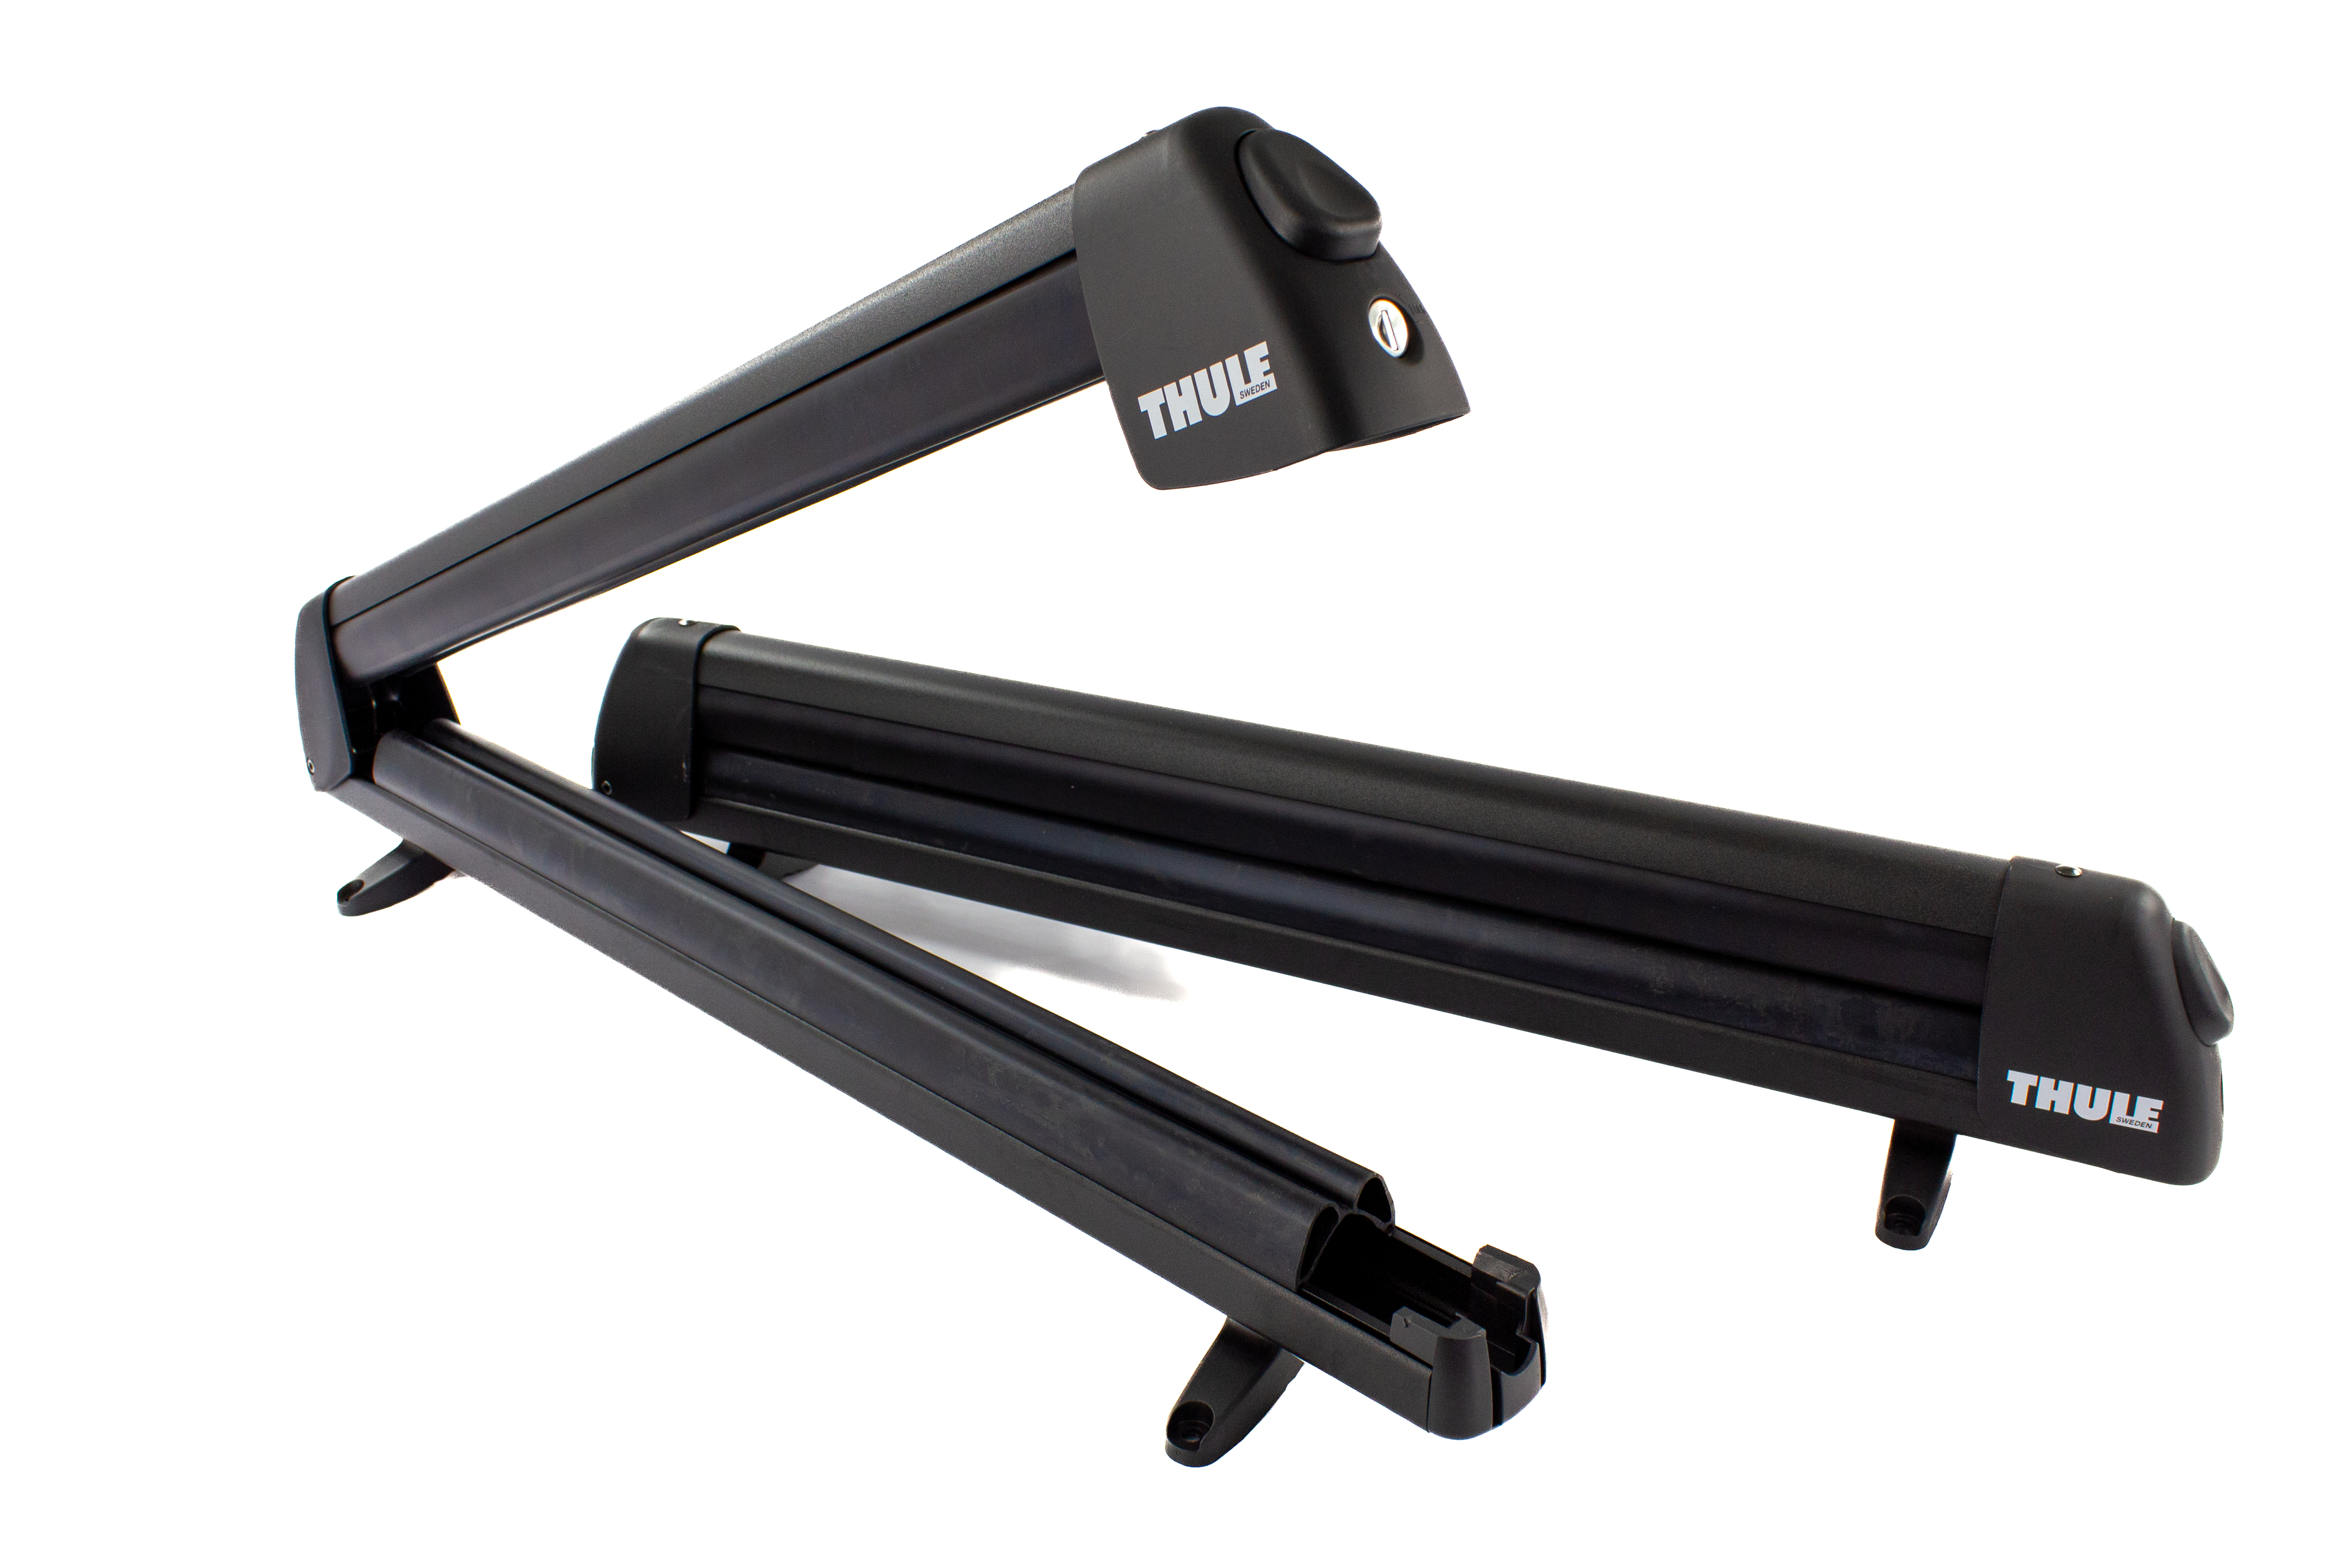 Will this work on Thule wing style cross bar?